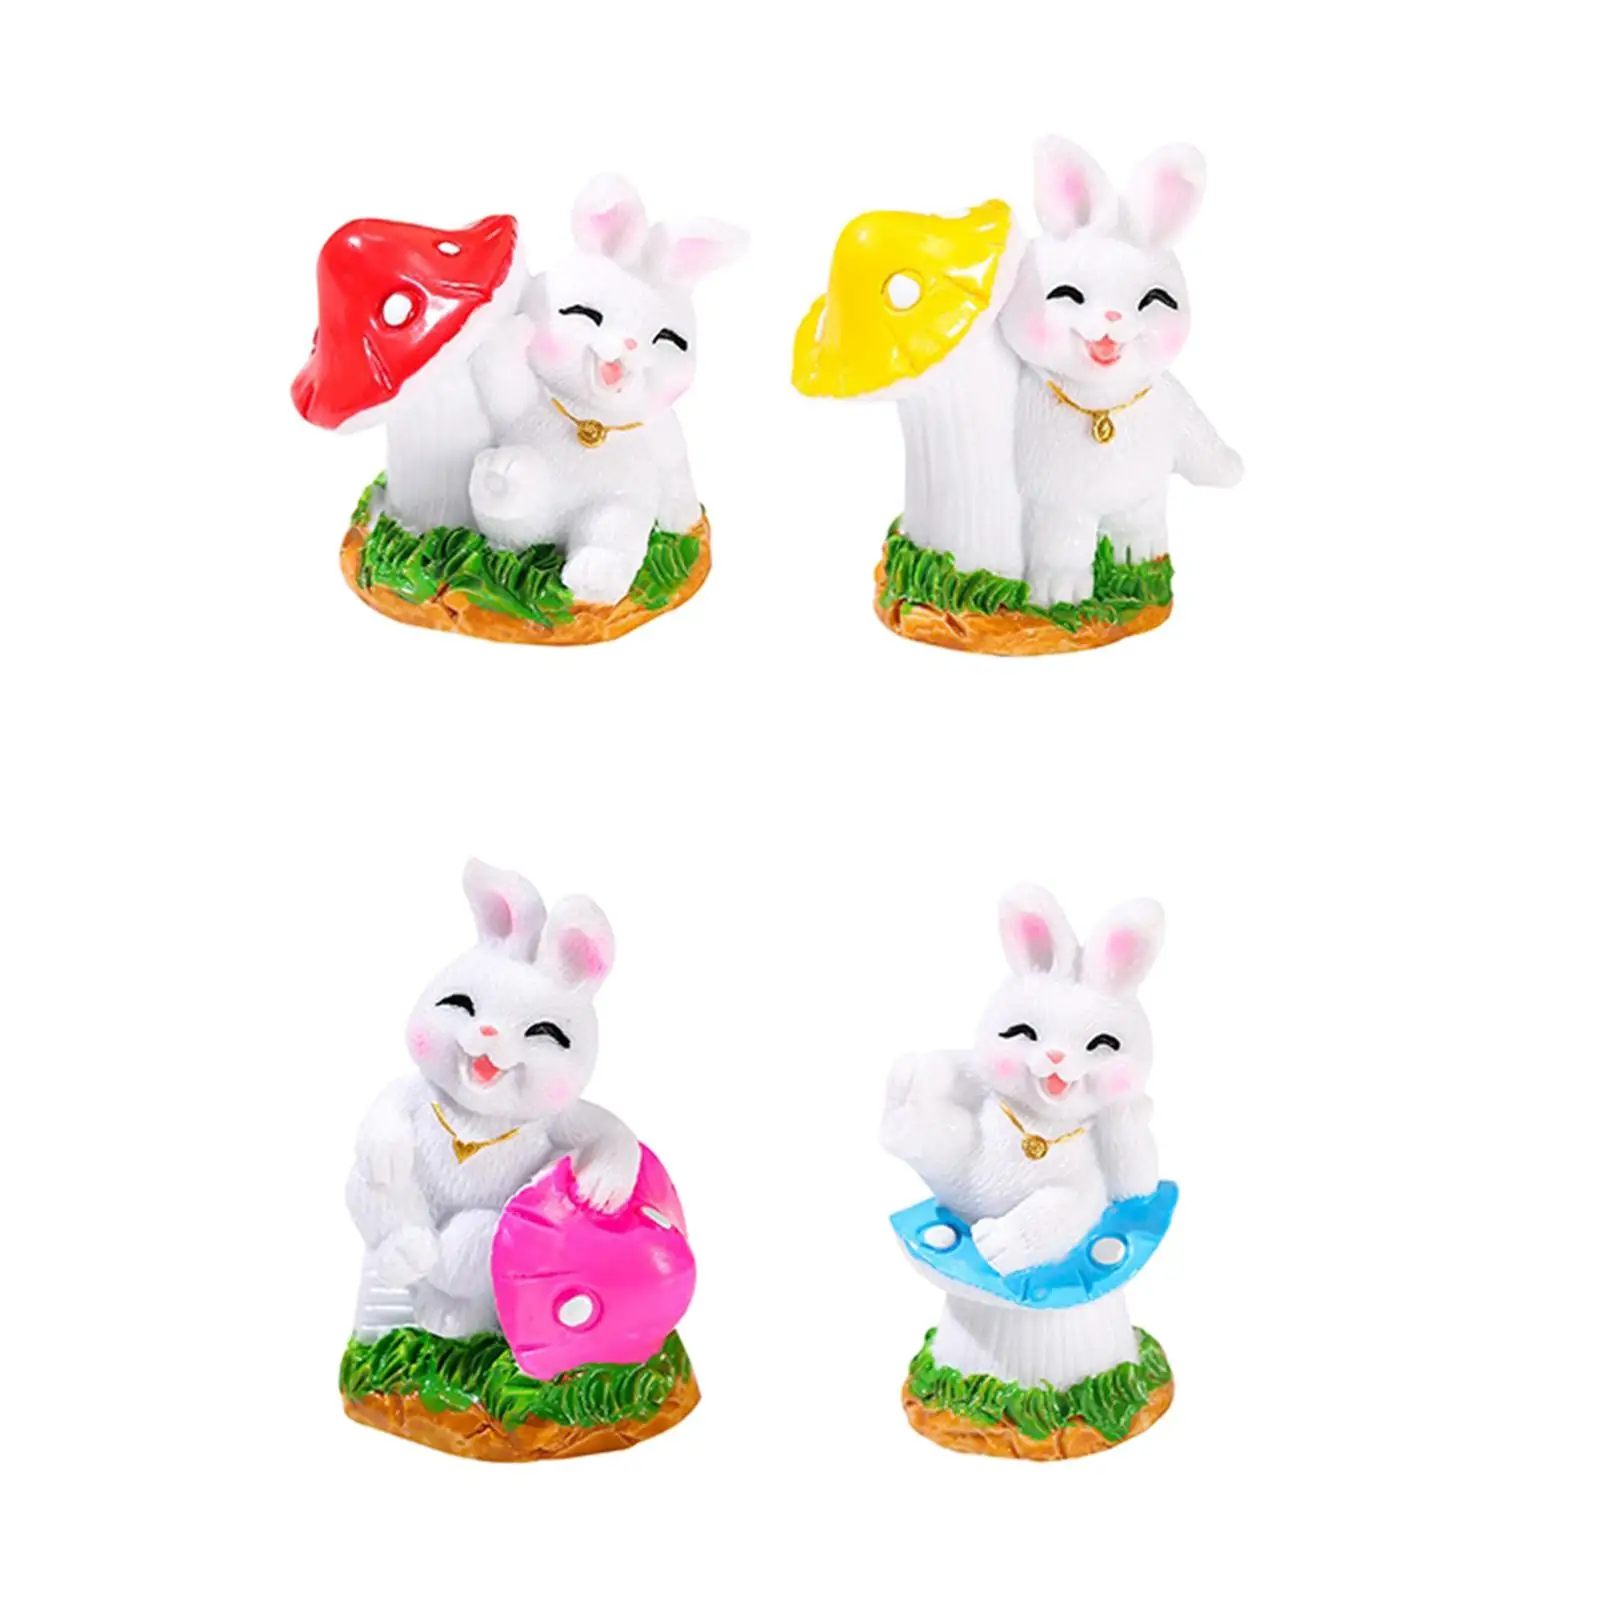 4Pcs Hand Painted Rabbit Animal Figurine Bunny Figurine Rabbit Decoration Sculpture Statue for Micro Landscape Car Easter Gifts